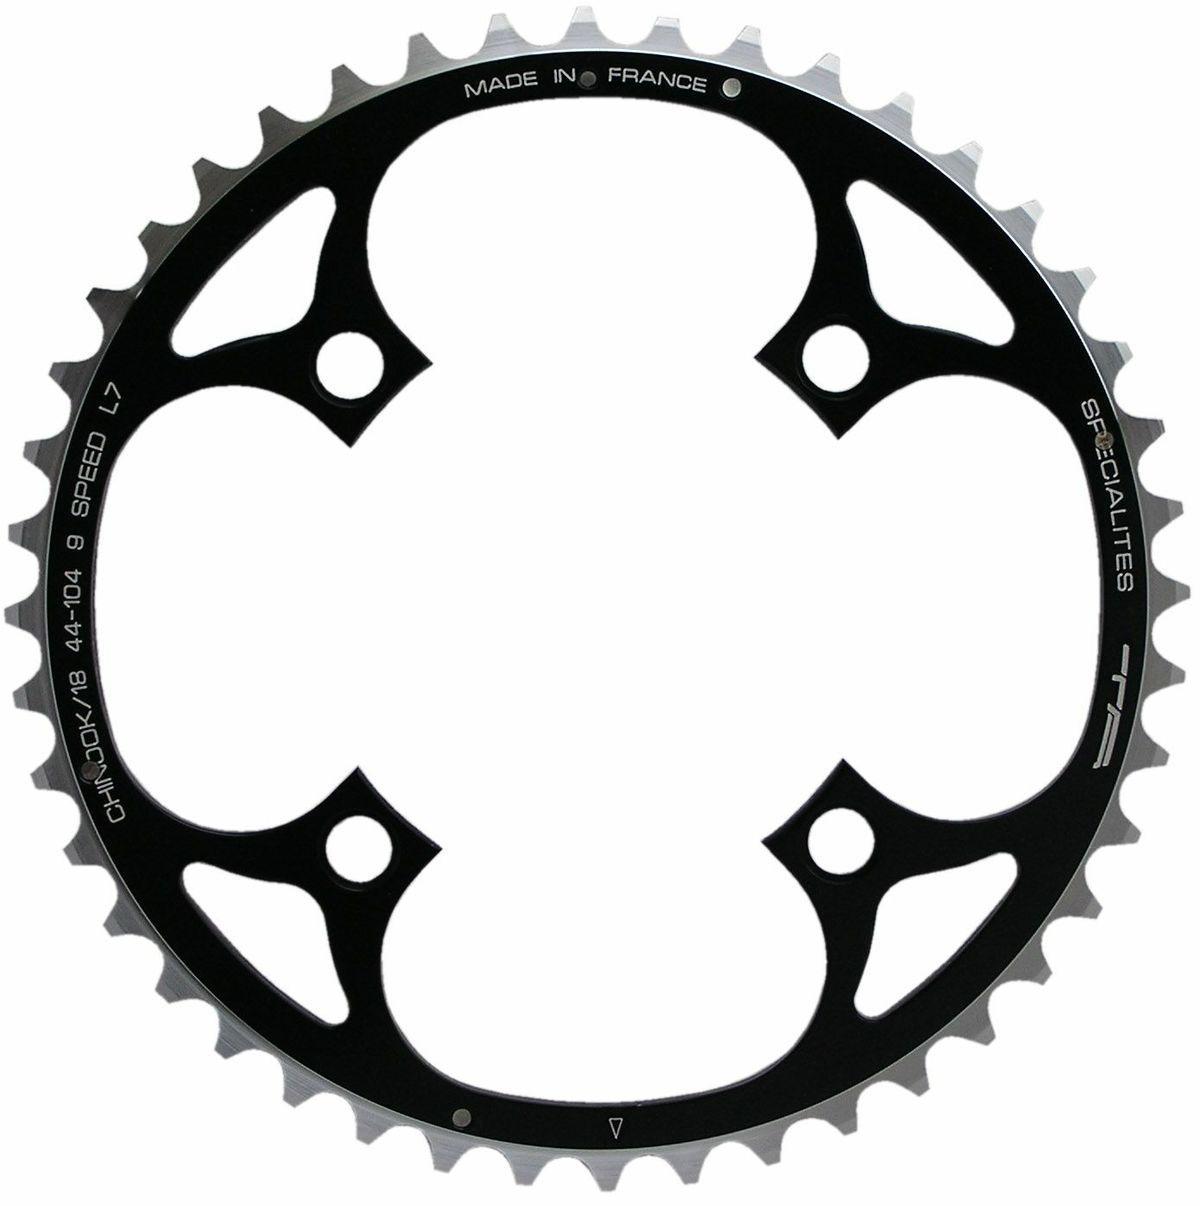 Ta 104 Pcd Chinook 4-arm Mtb Outer Chainring 42-46t - Black